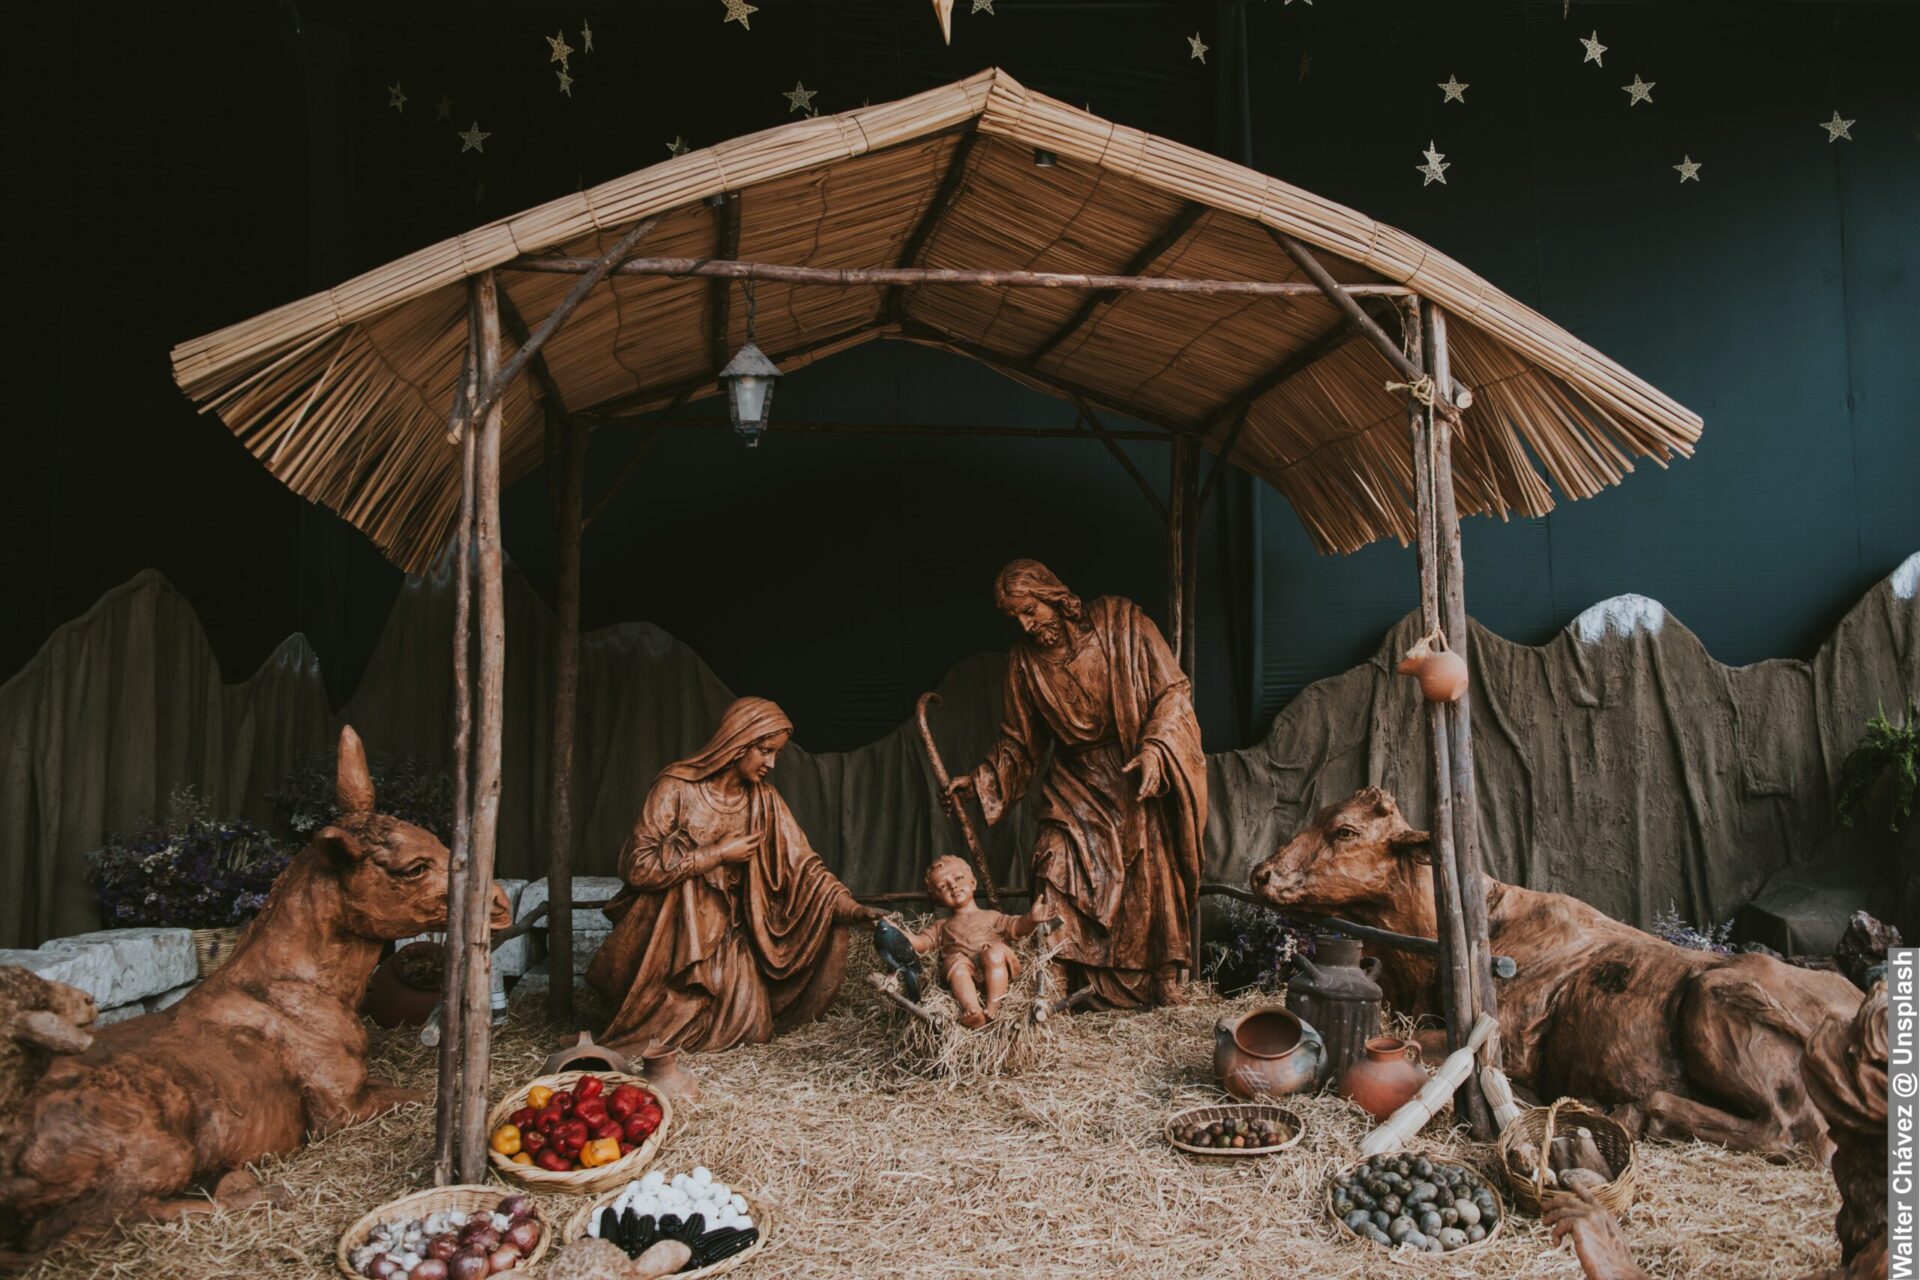 The Birth of Jesus with Joseph and Mary Advent